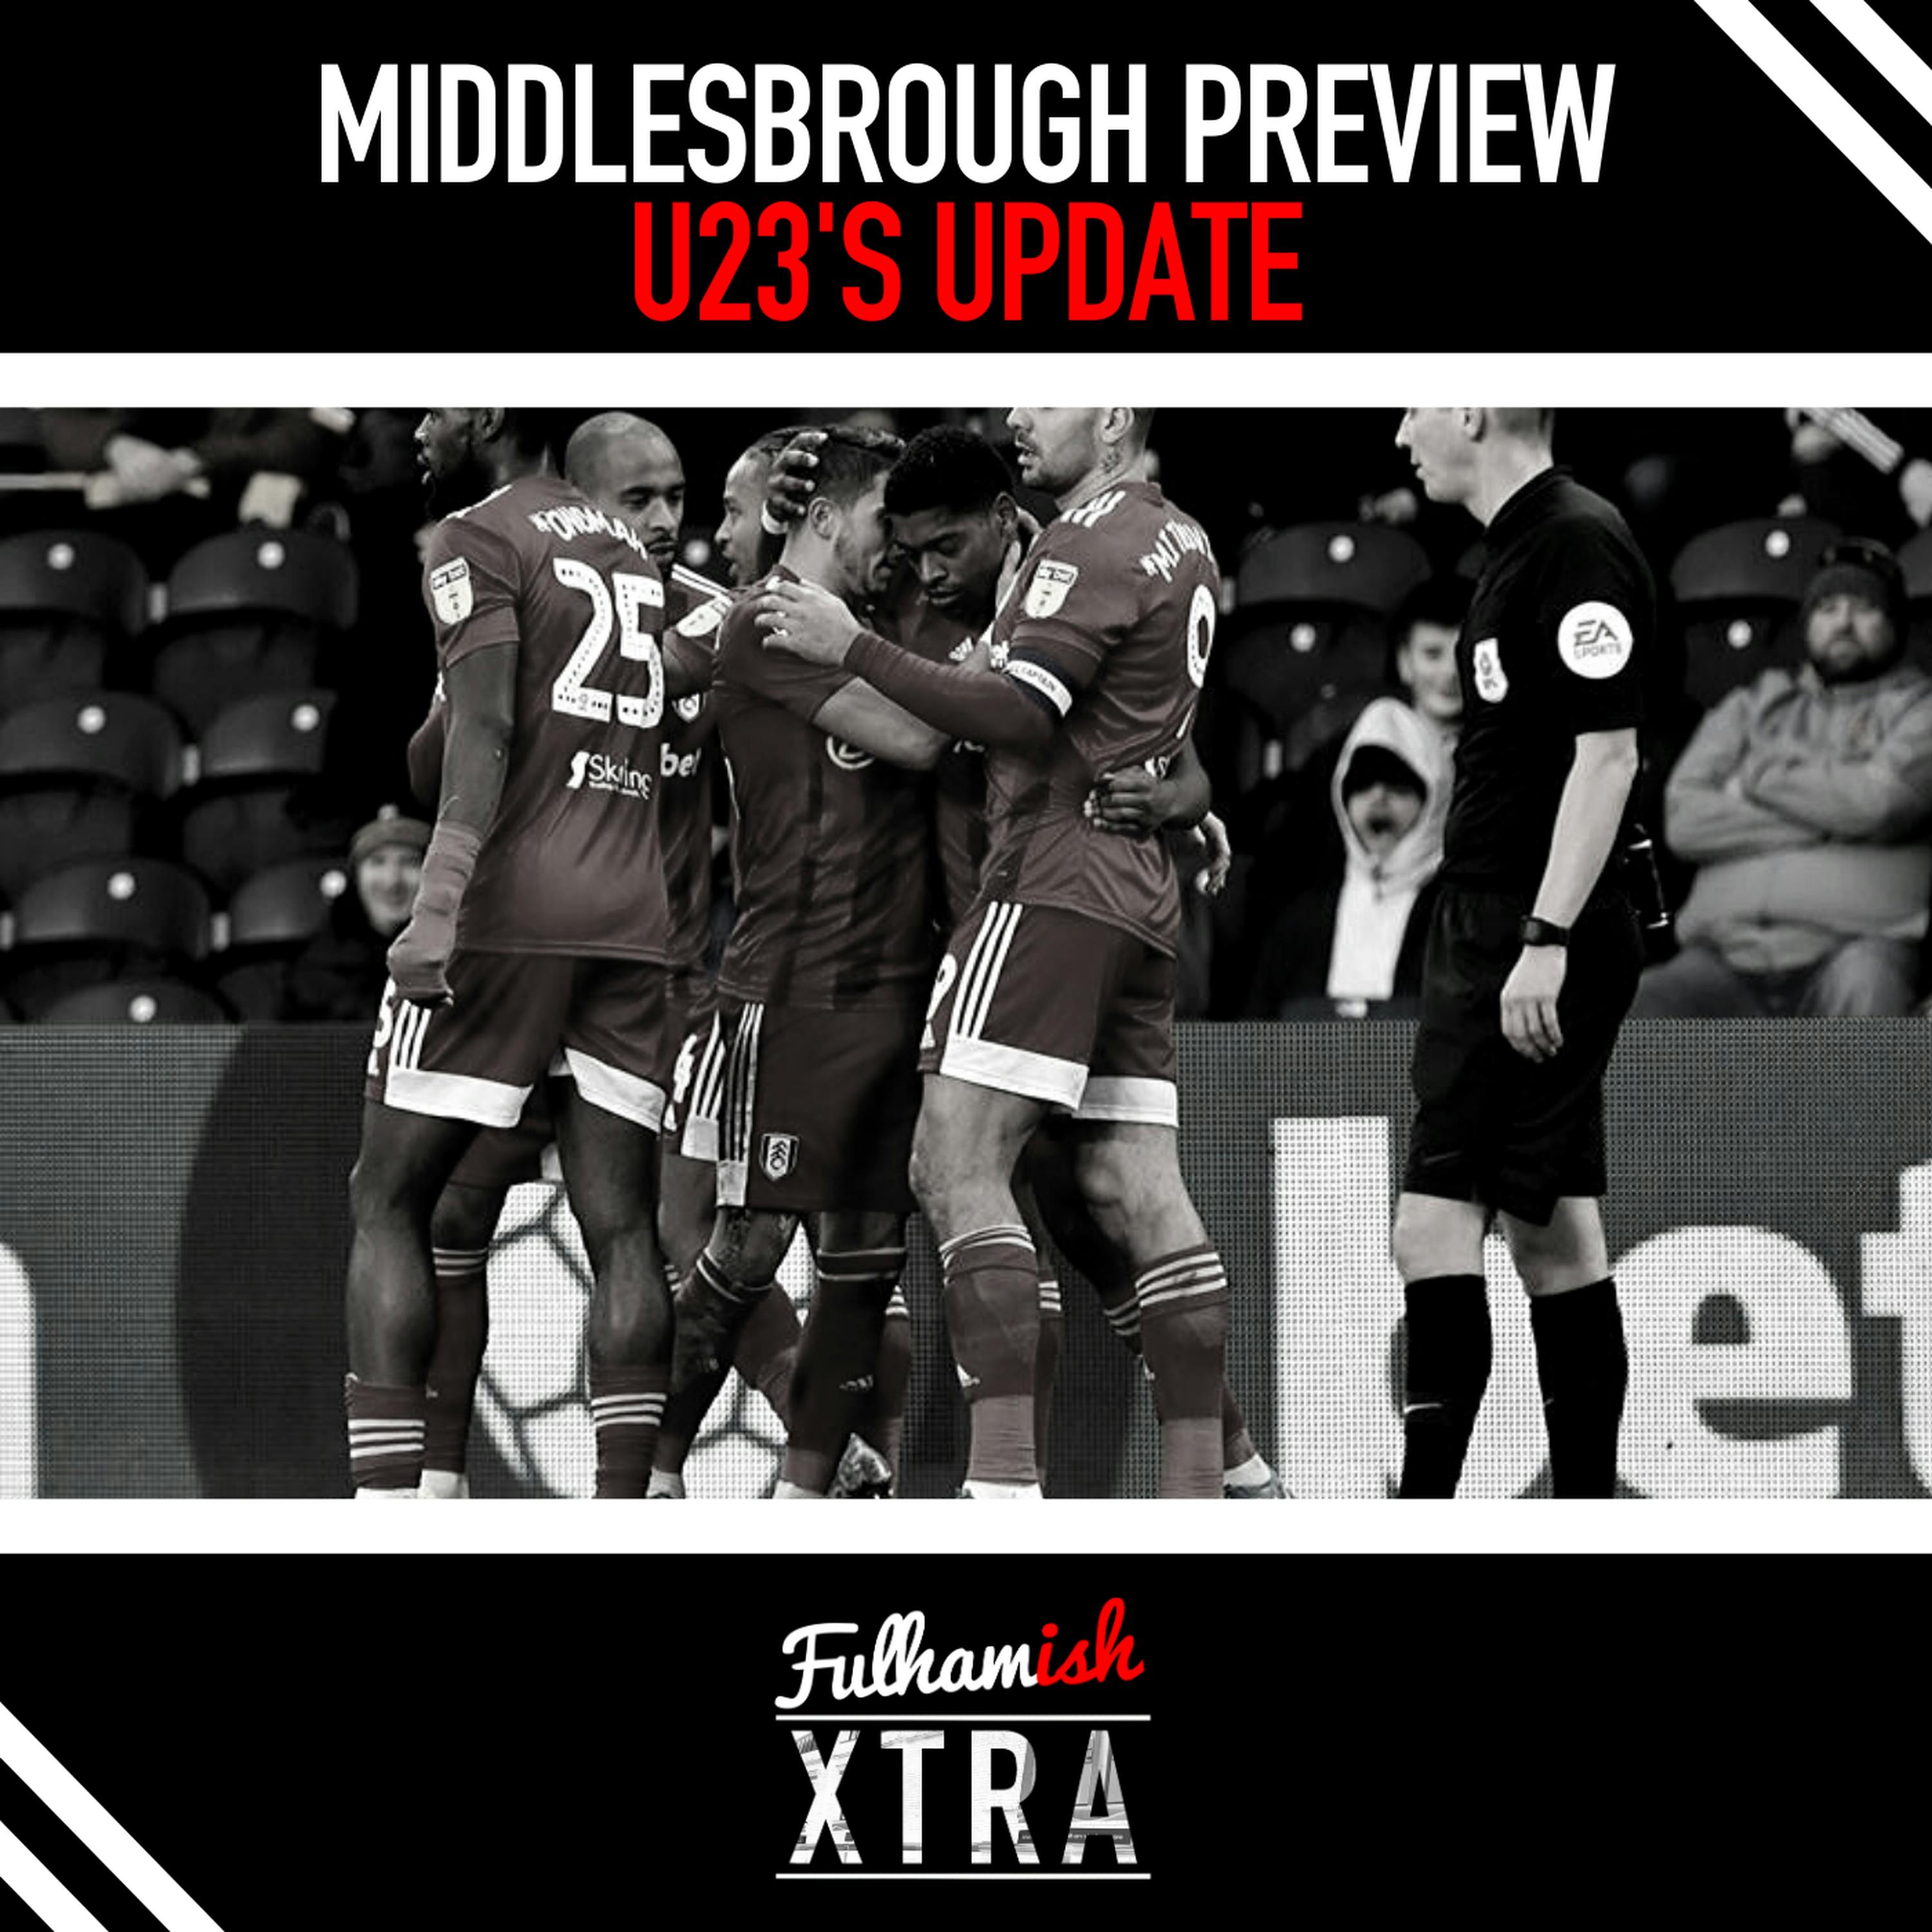 Middlesbrough Preview & U23s Update